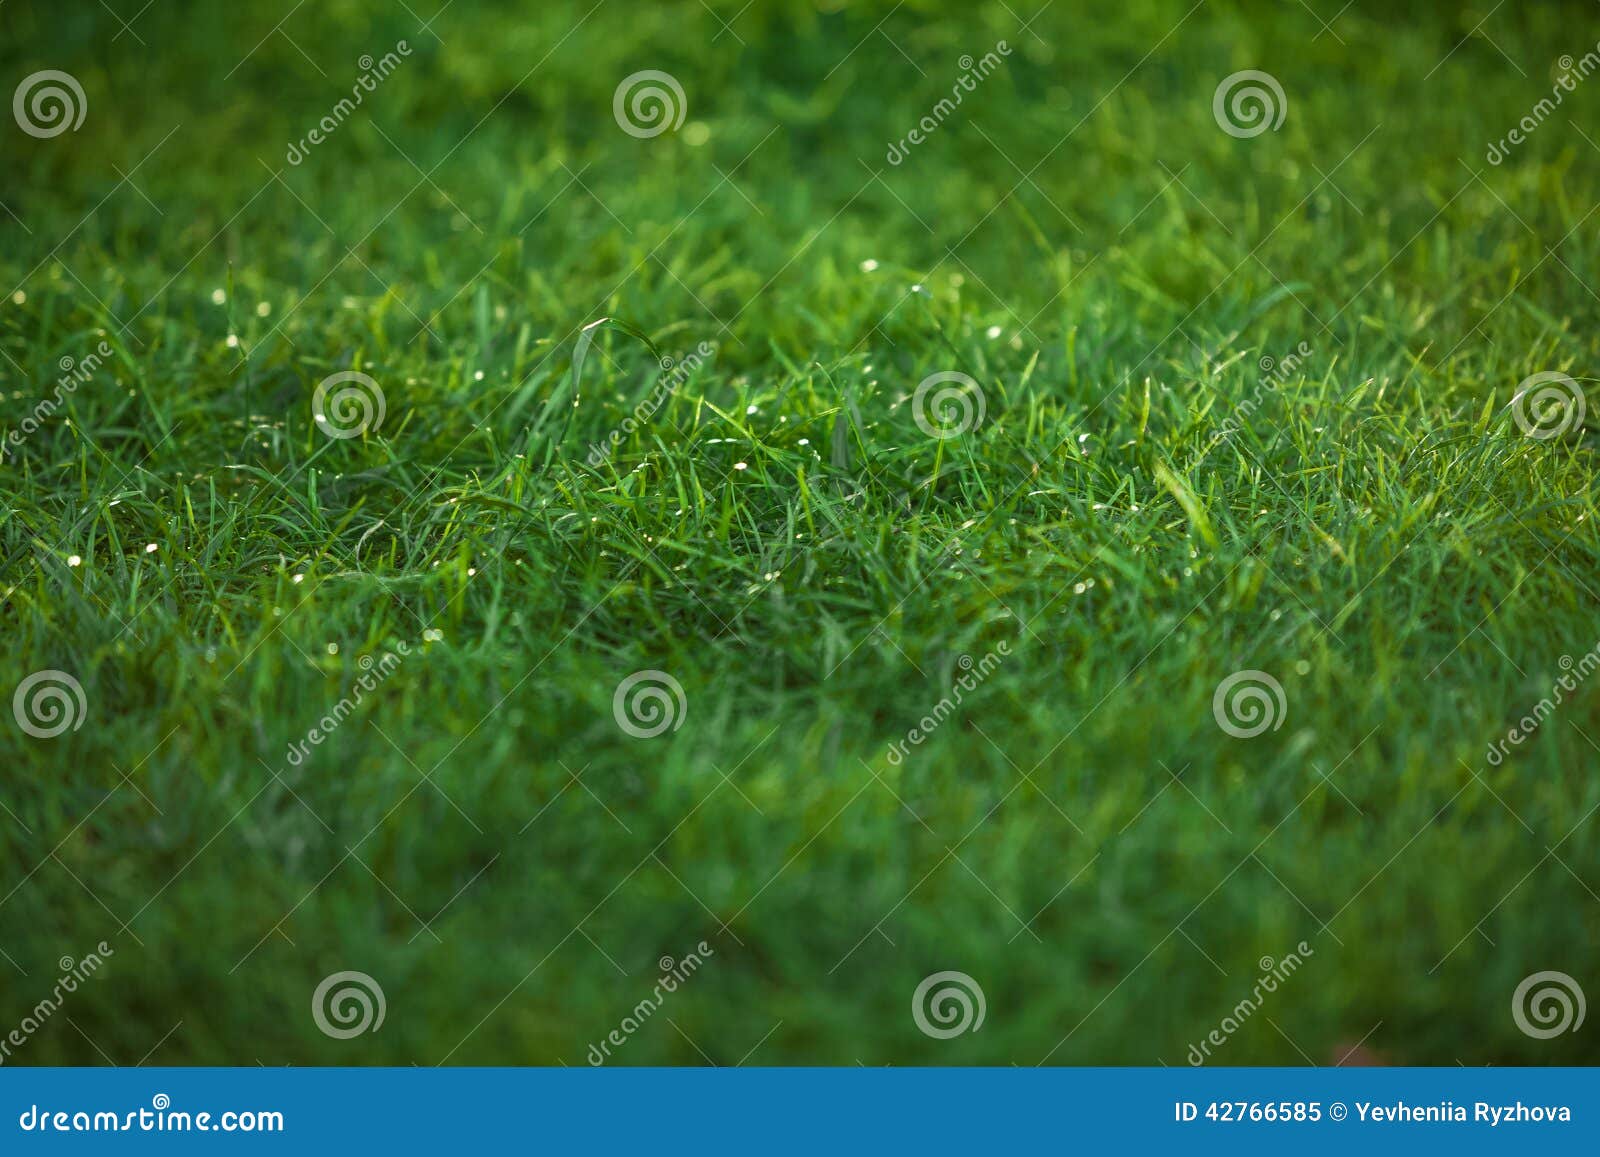 Texture of Emerald Green Grass Lawn Stock Image - Image of green, lush